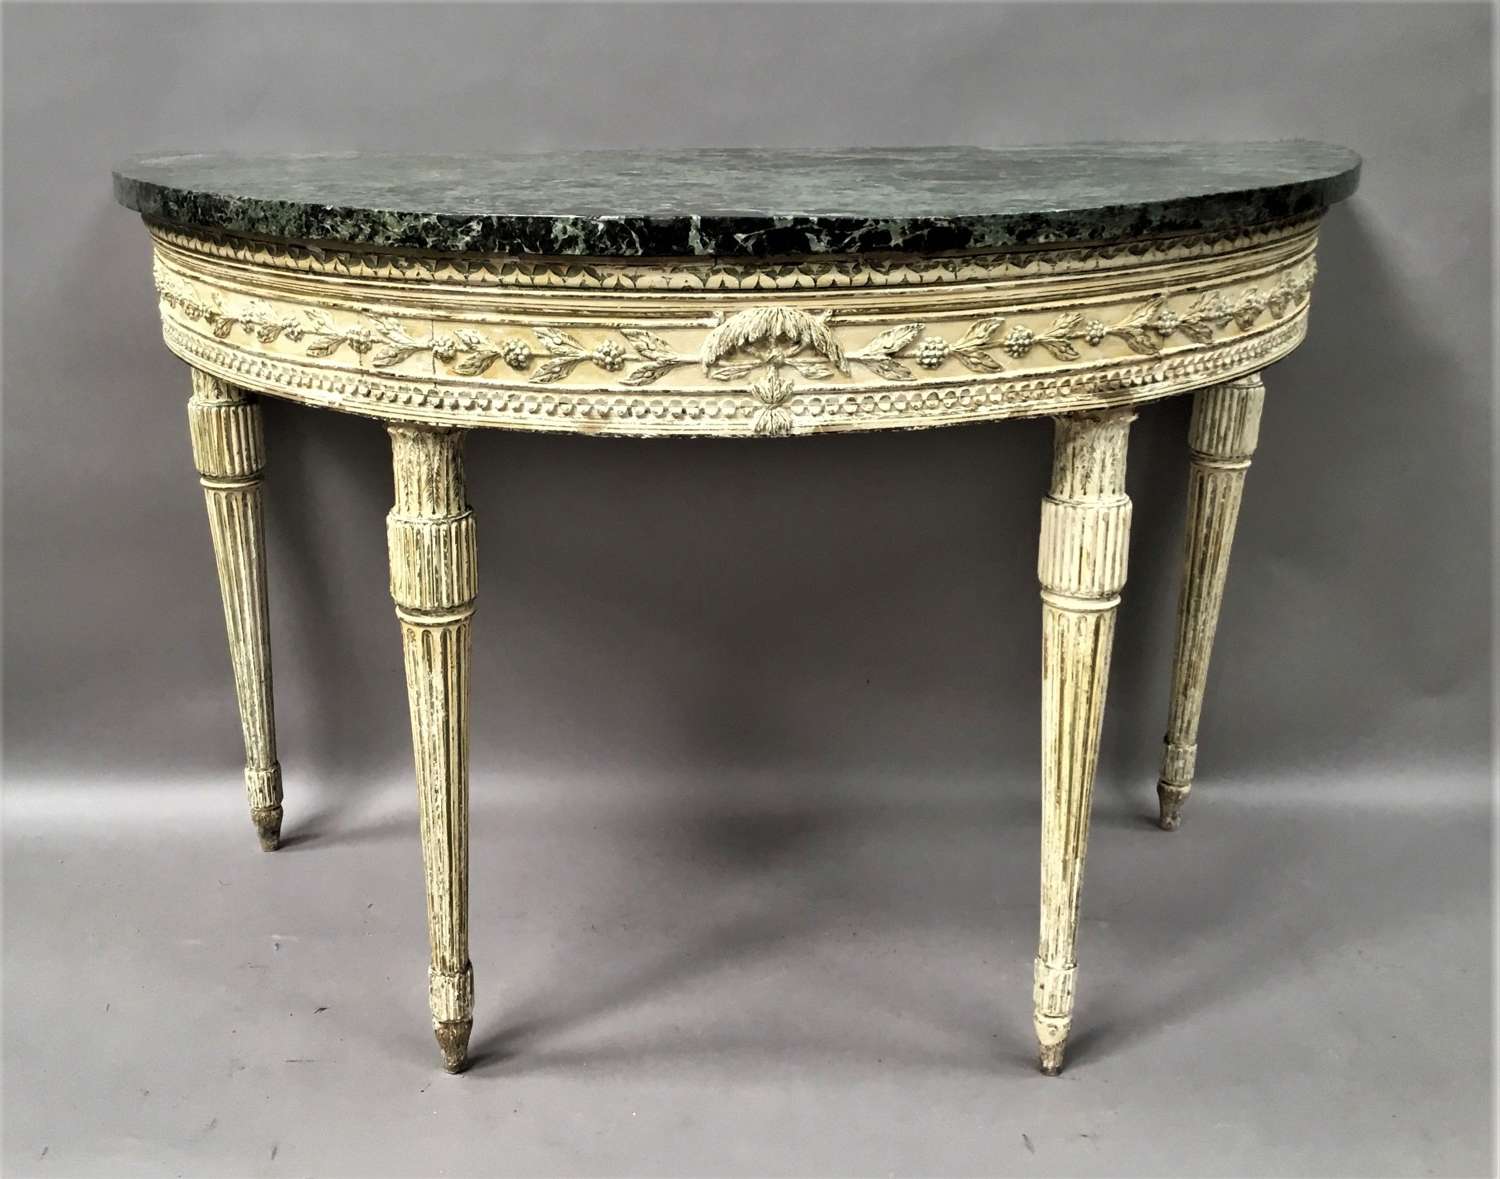 Important C18th Italian painted neo classical console table